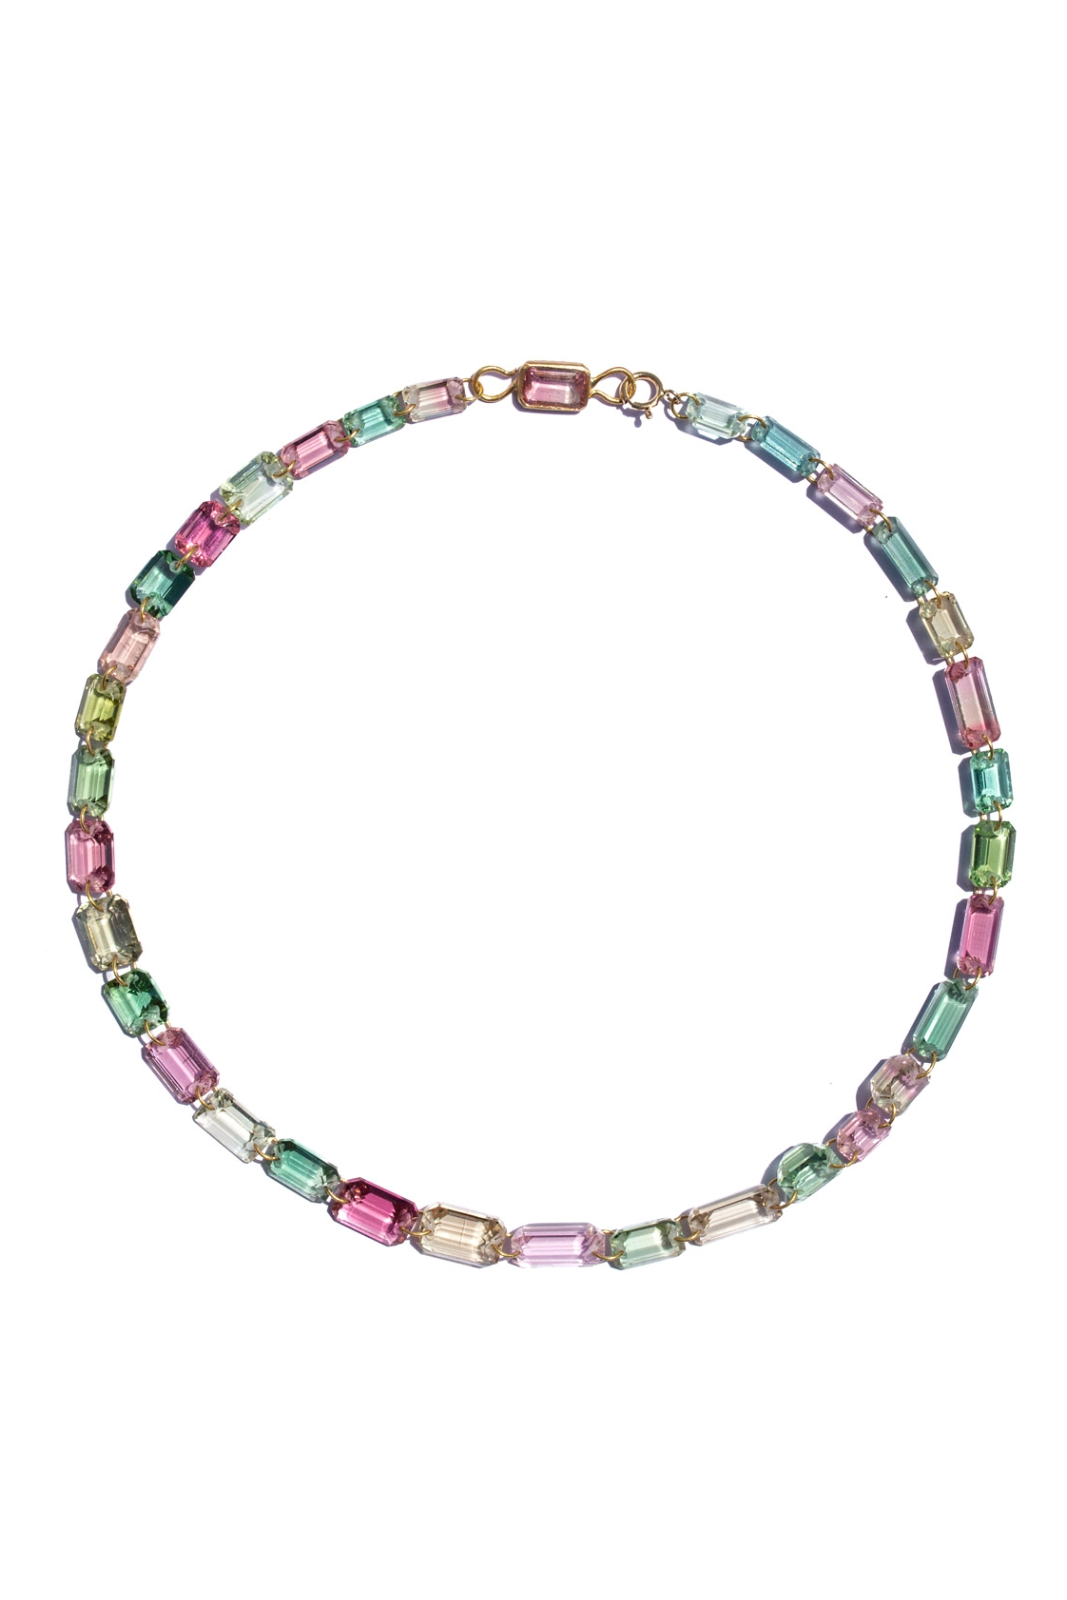 22K Yellow Gold Multicolored Tourmaline Necklace